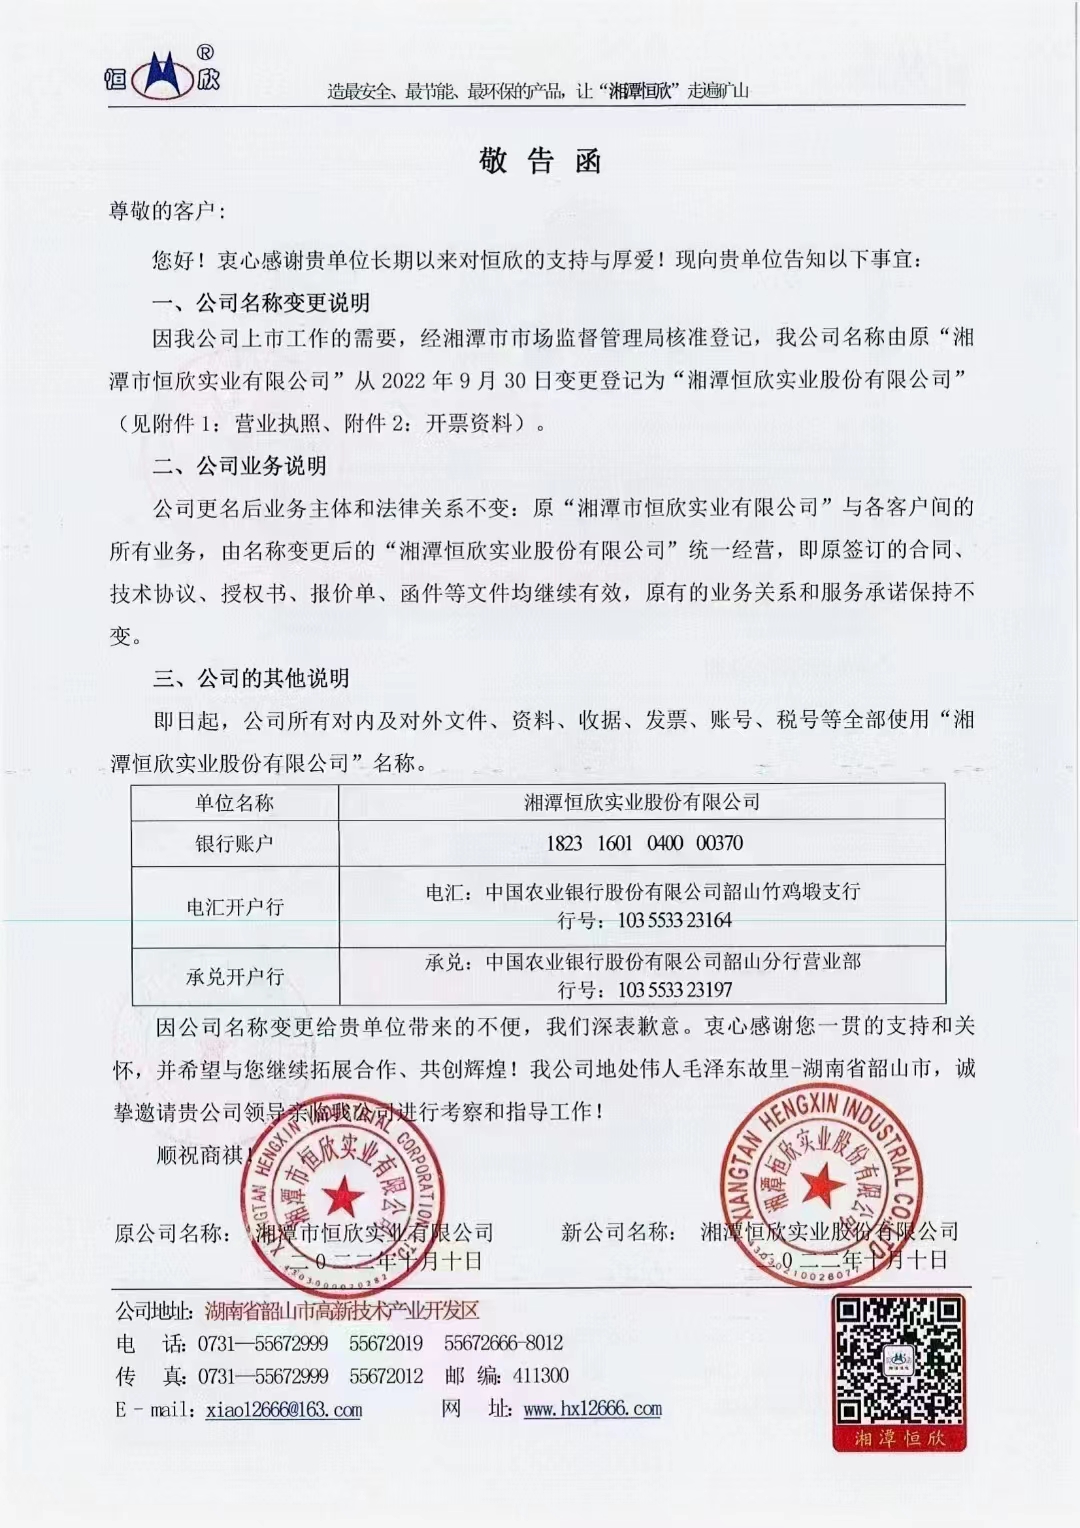 Warm congratulations on our company's renaming to "Xiangtan Hengxin Industrial Co., Ltd."